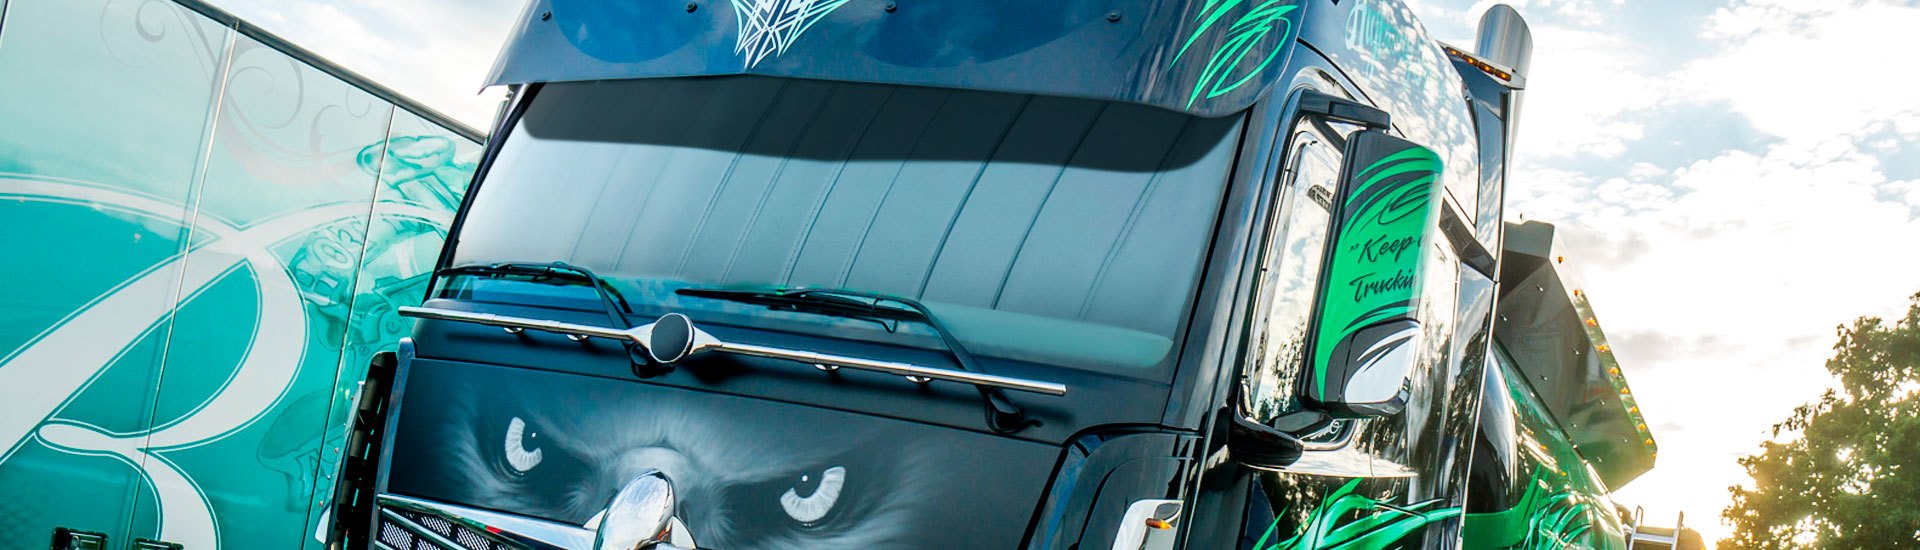  Side Window Sun Shade for Semi-Truck - Custom Fit for  Freightliner Volvo VNL International Trucks - RV Semi Truck Accessories,  Interior UV Protection, Easy Install - Keep Your Rig Cool 